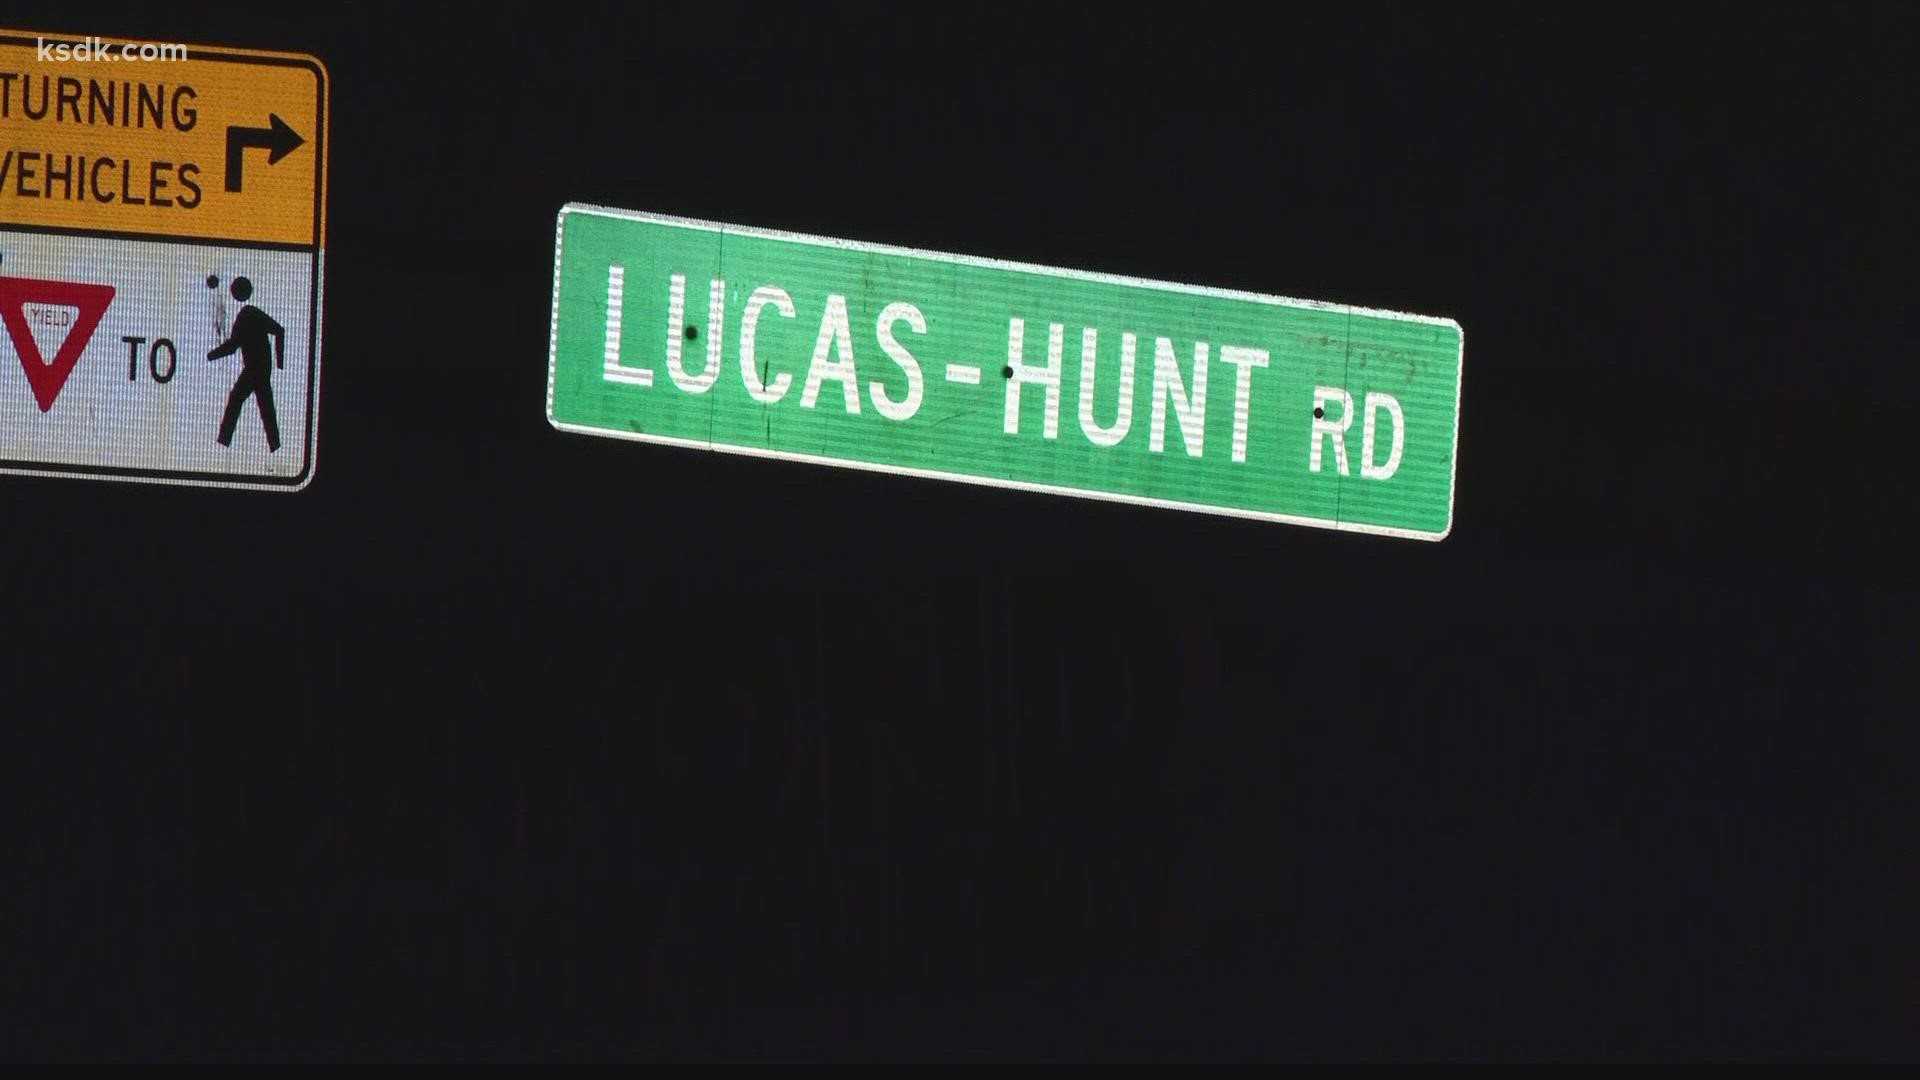 It happened Friday night on Lucas & Hunt, just south of Natural Bridge.